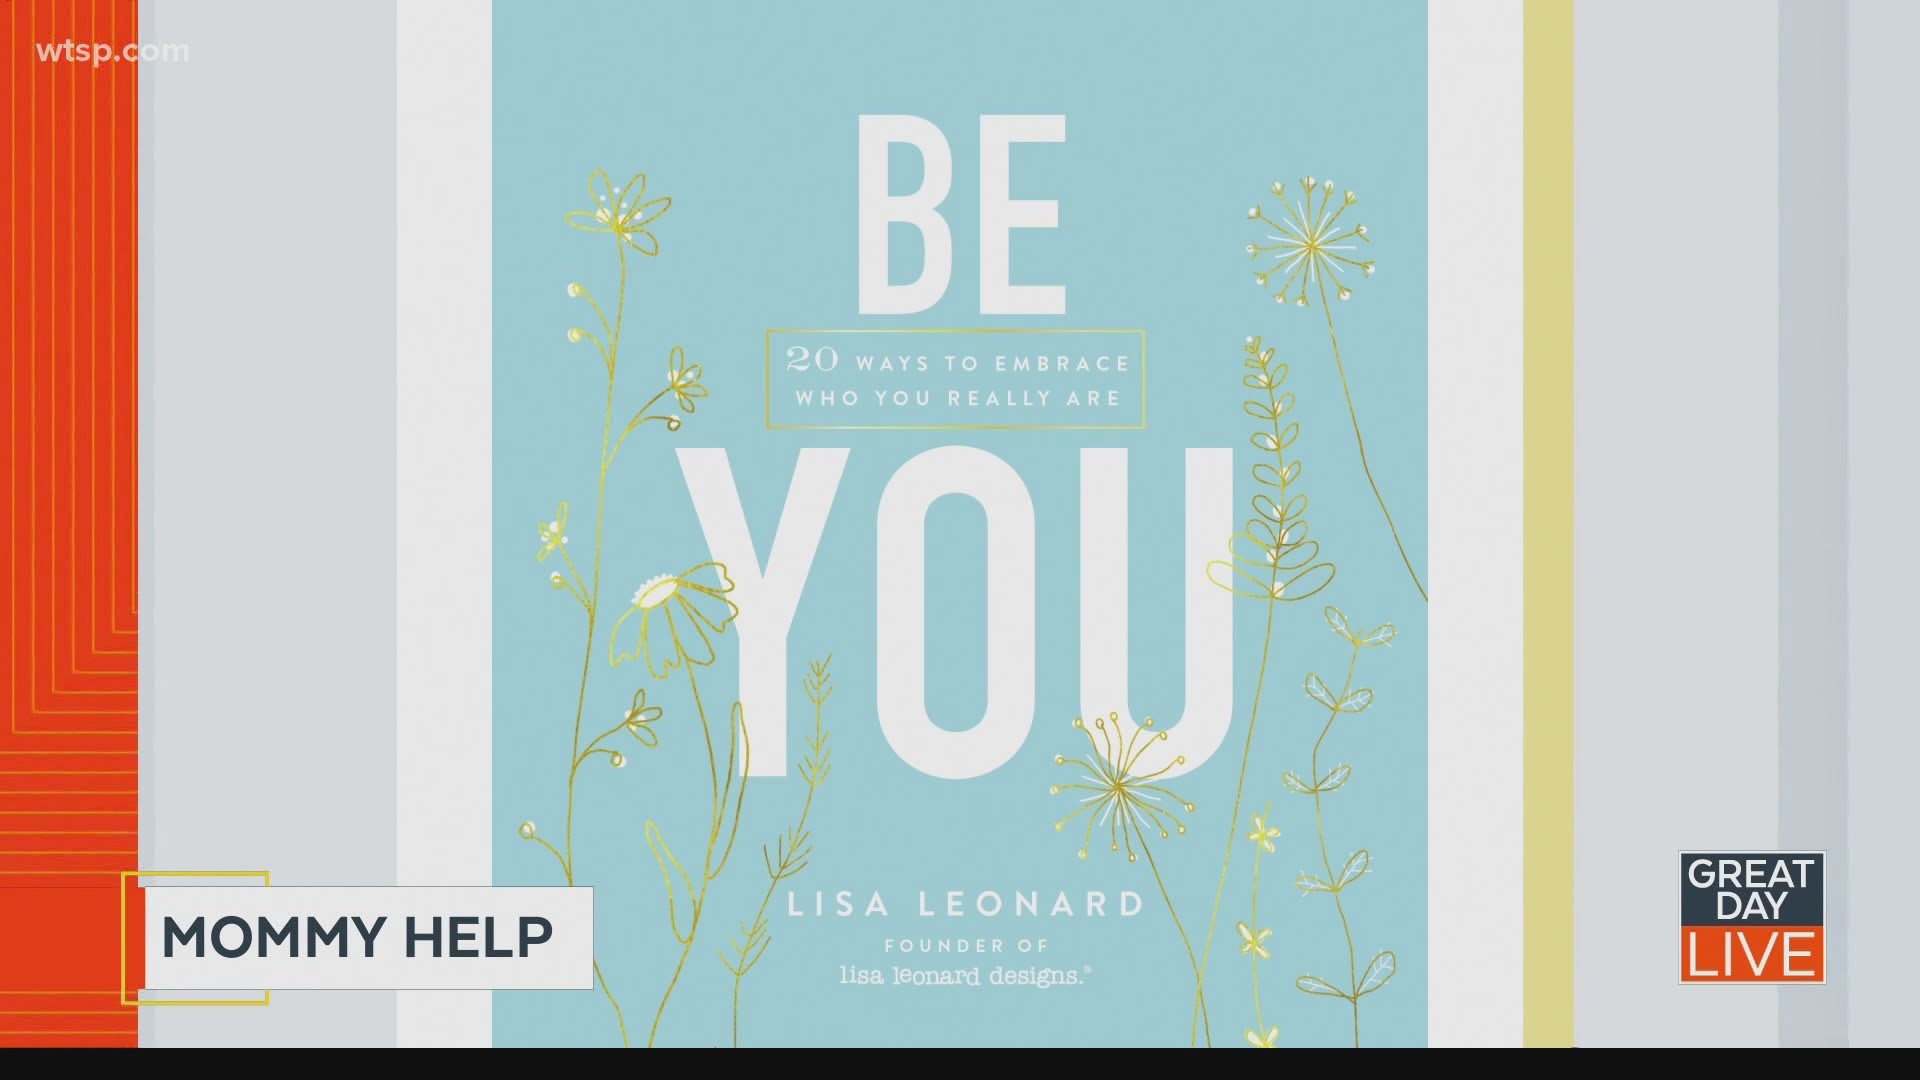 You can find more information about Leonard’s book by heading to her website lisaleonard.com.